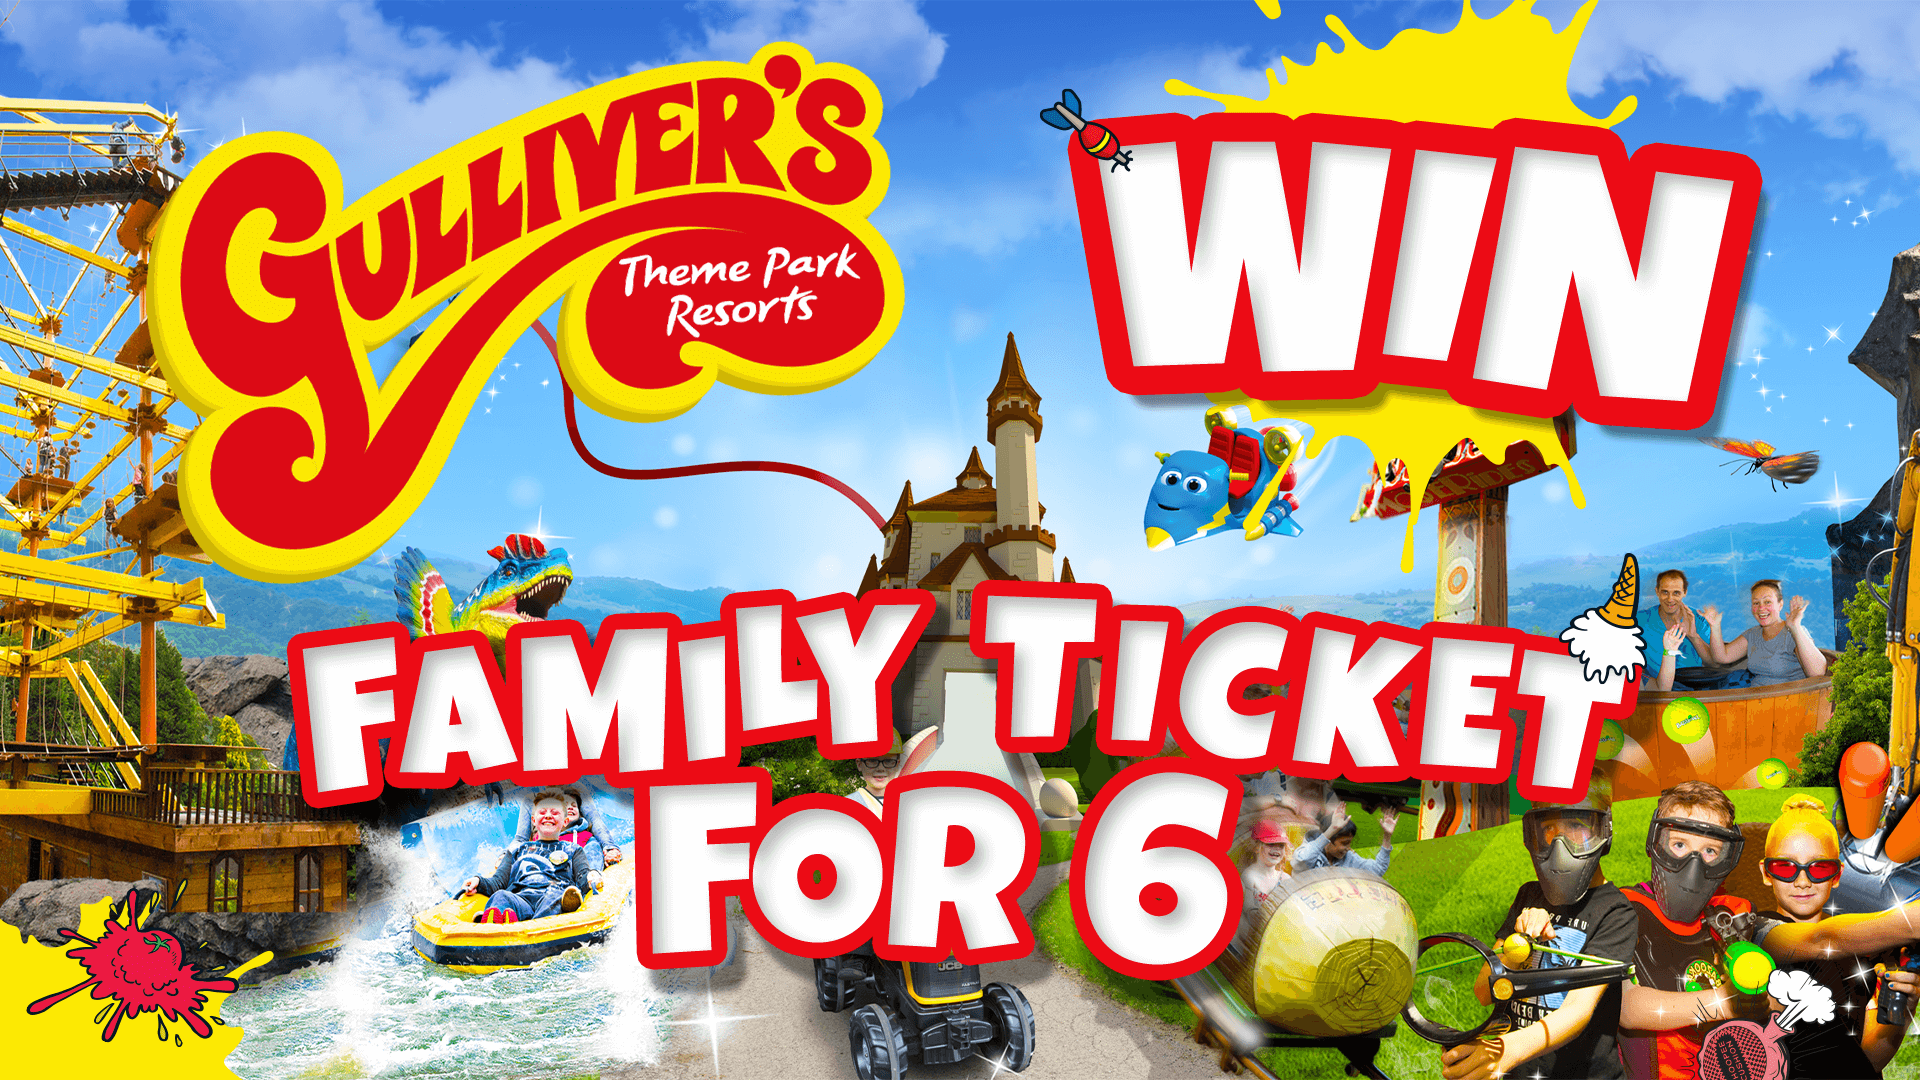 Gulliver's competition family ticket for 6